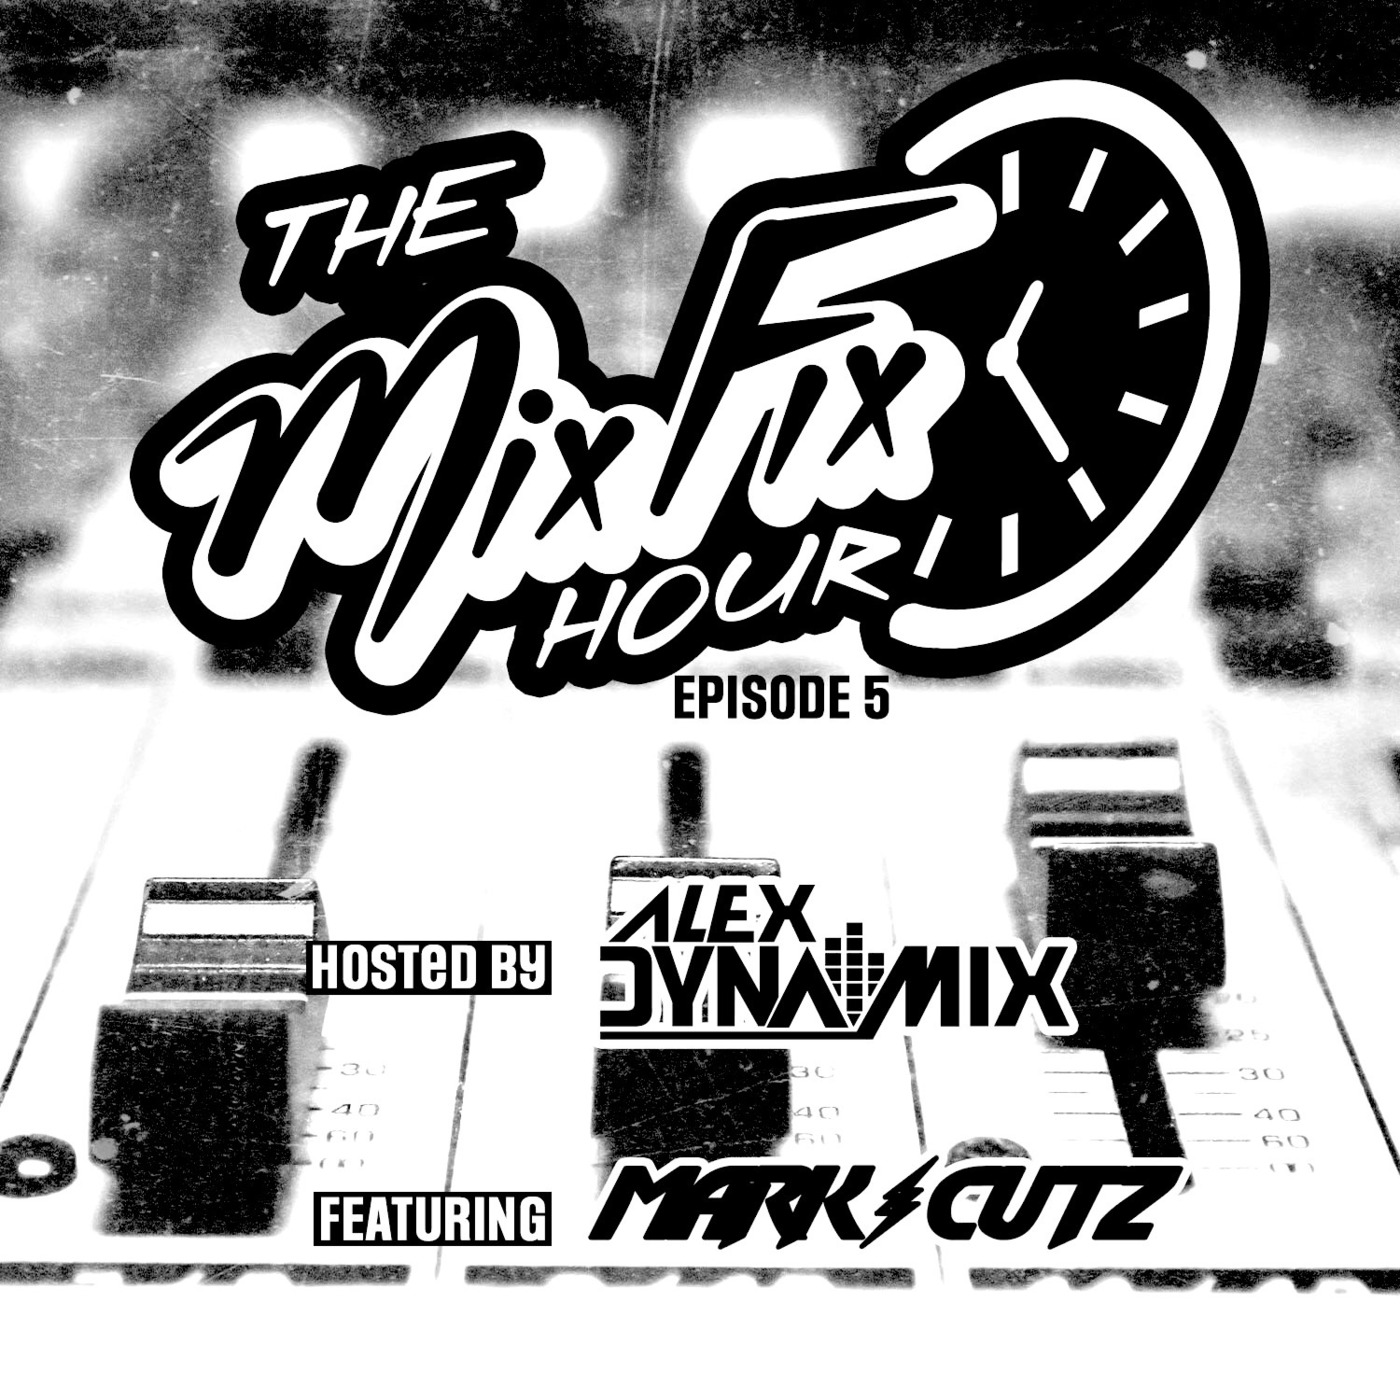 The Mix Fix Hour Hosted By Alex Dynamix - Episode 5 Feat. Mark Cutz